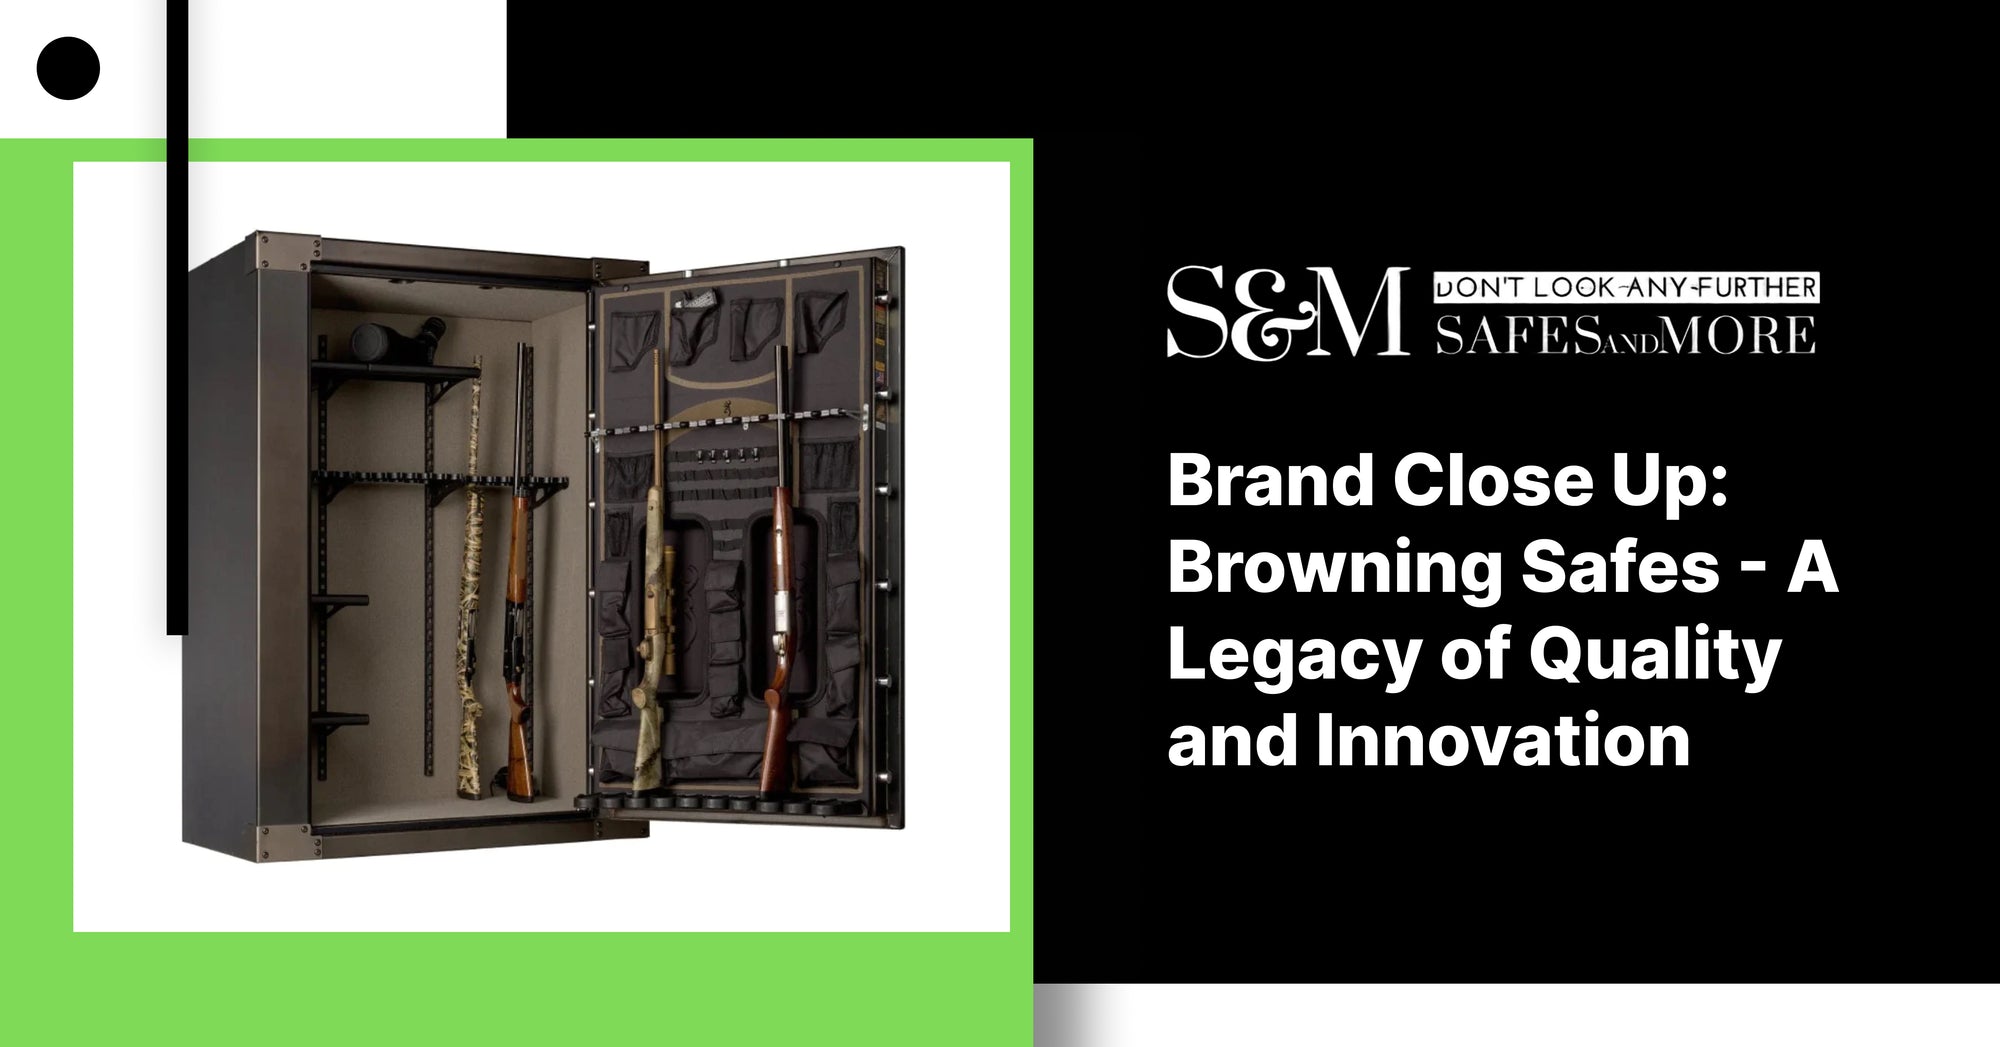 Brand Close Up: Browning Safes - A Legacy of Quality and Innovation